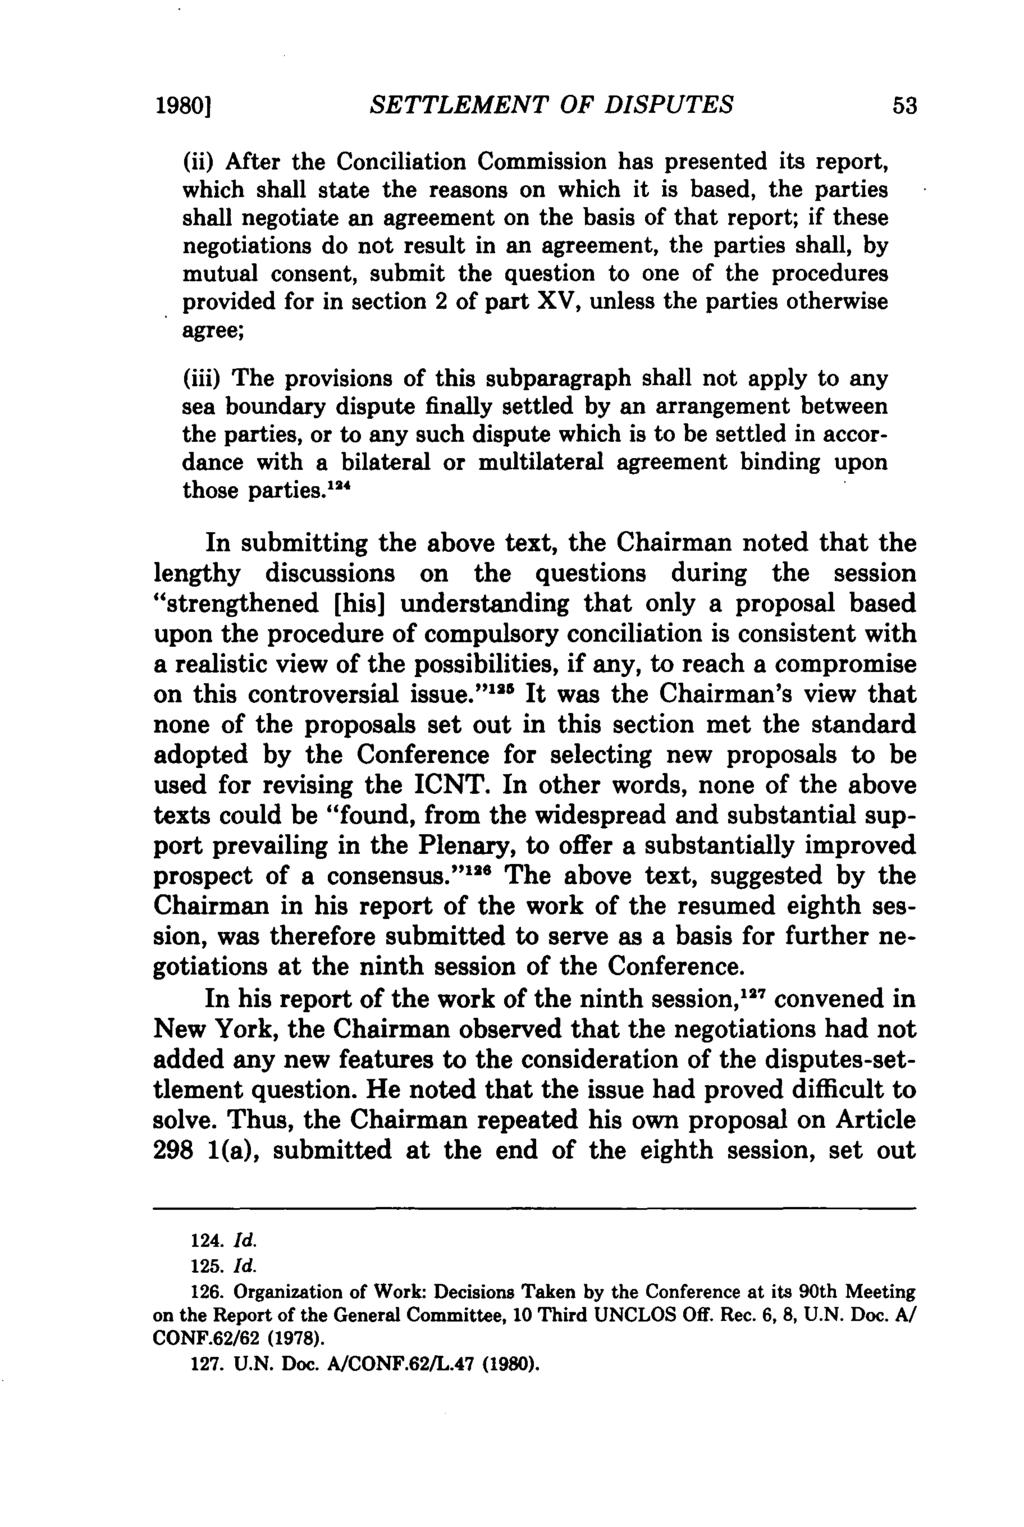 19801 SETTLEMENT OF DISPUTES (ii) After the Conciliation Commission has presented its report, which shall state the reasons on which it is based, the parties shall negotiate an agreement on the basis